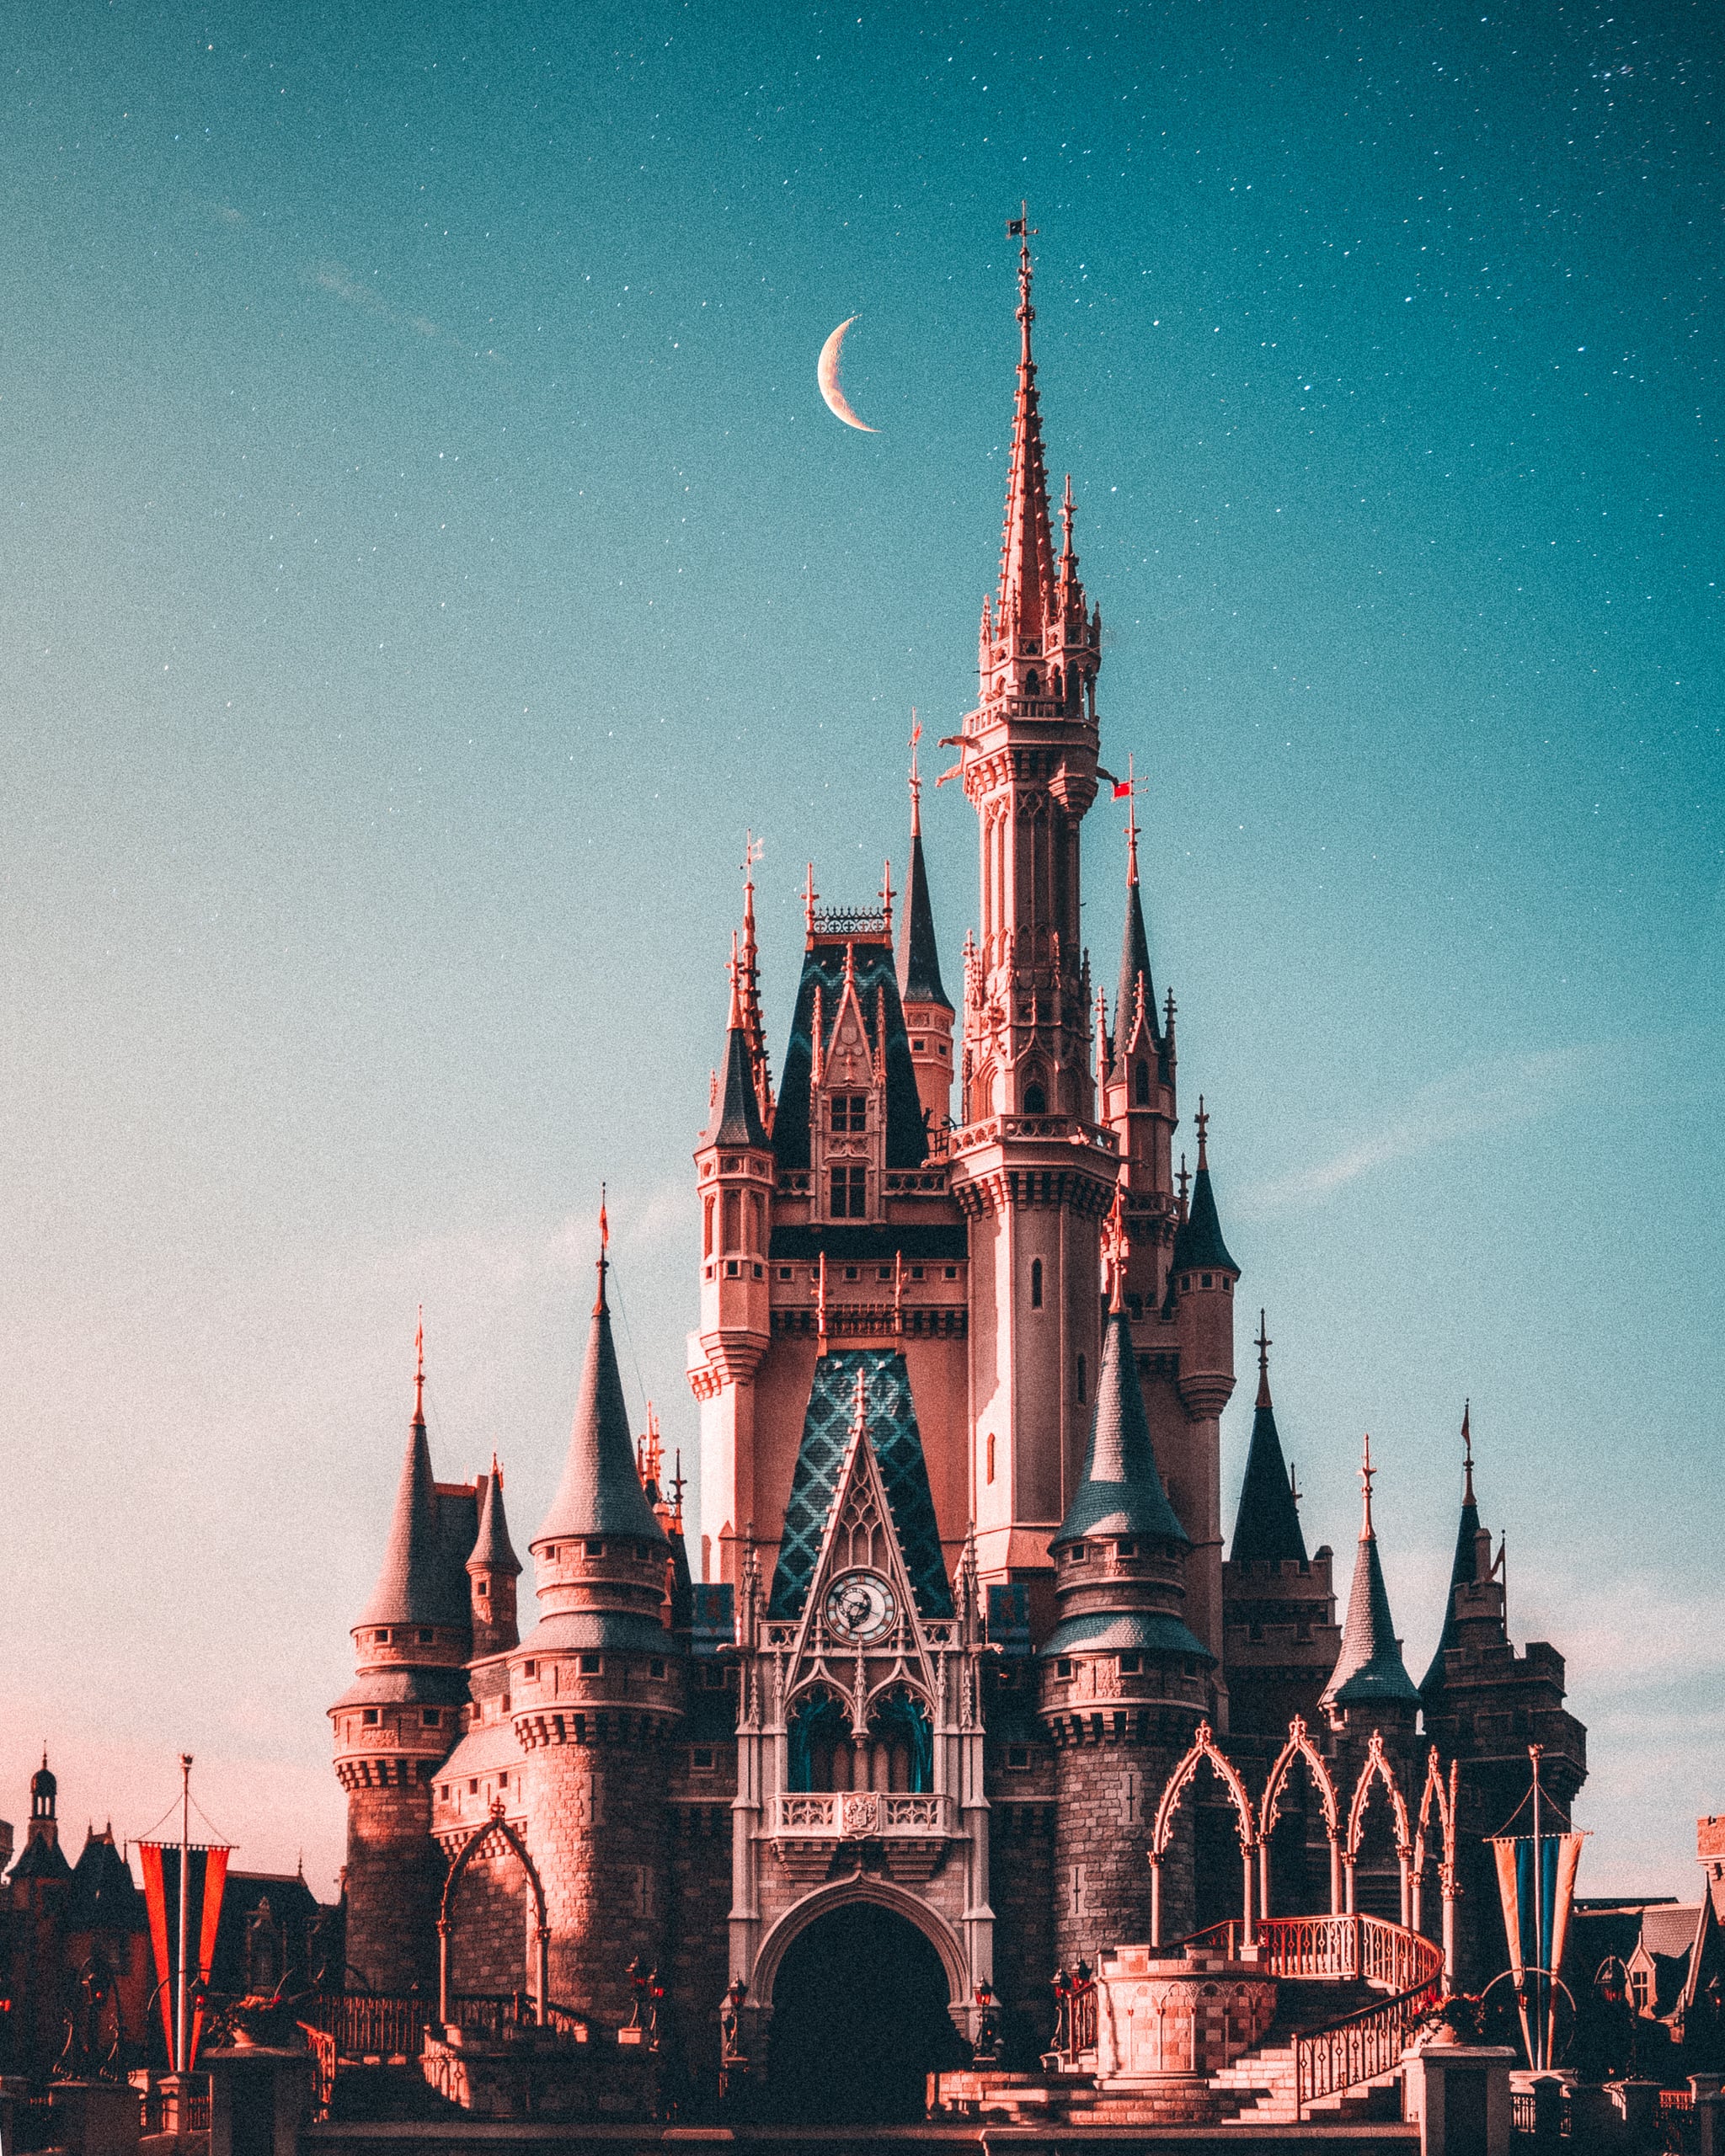 Disney iphone wallpaper the best wallpaper ideas thatll make your phone look aesthetically pleasing tech photo